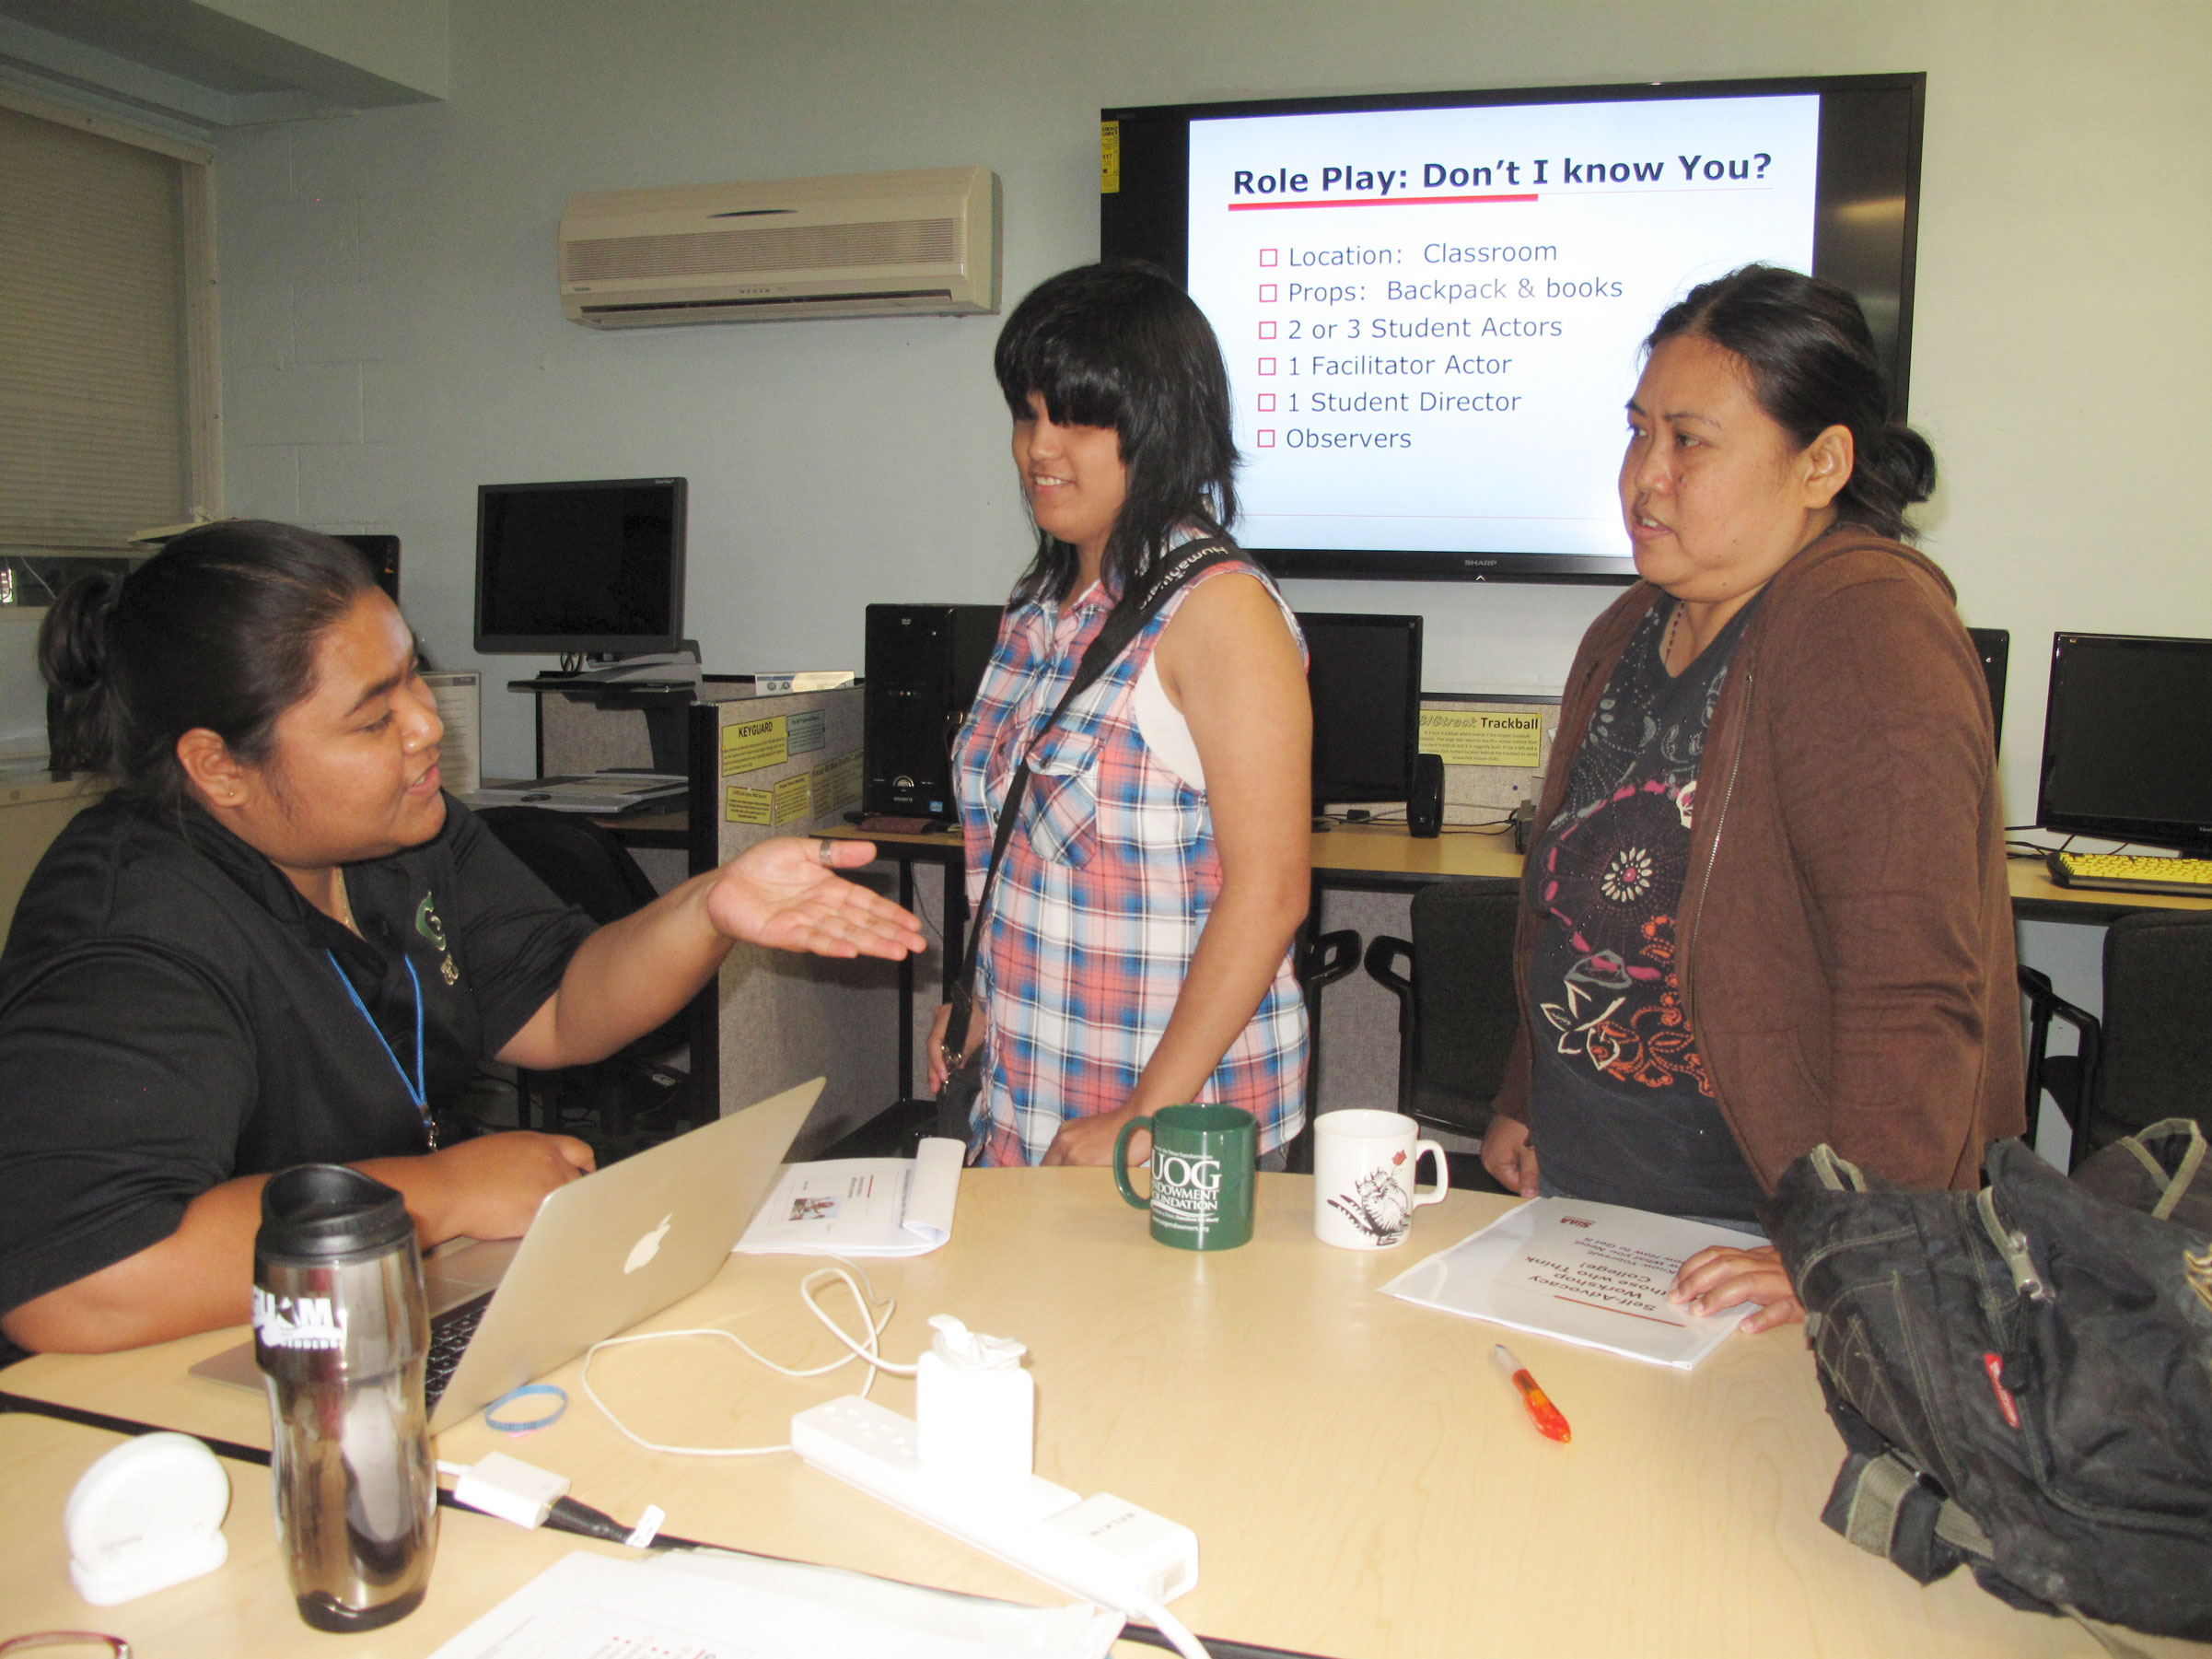 Photo of workshop attendees participating in an activity.